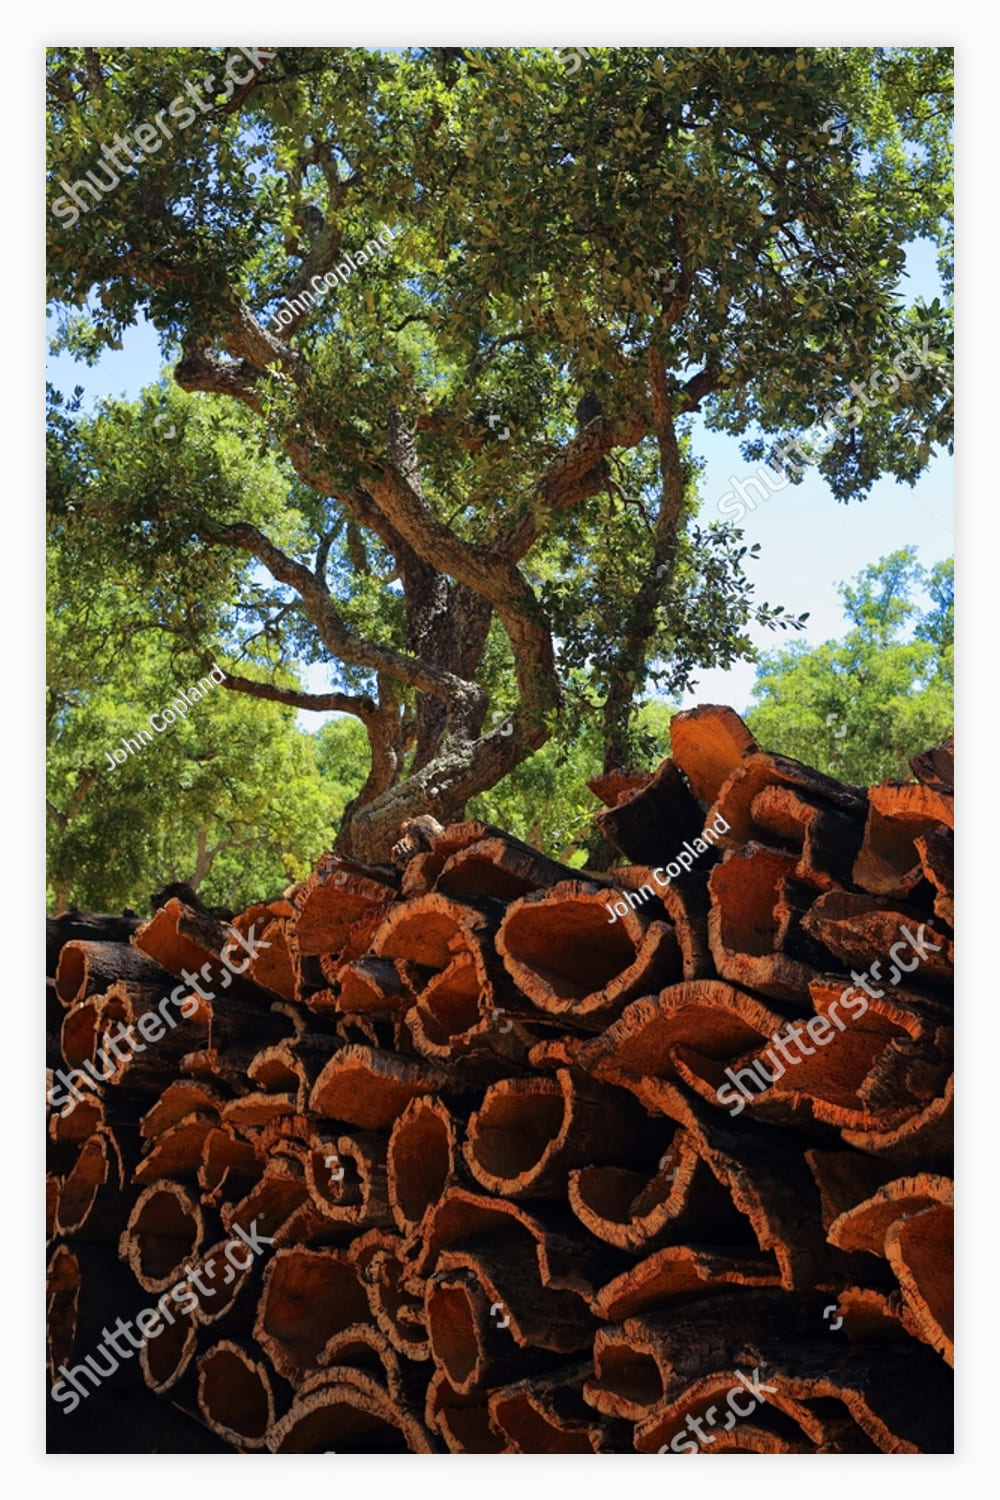 A stack of recently harvested cork oak bark drying in the sunshine under a cork oak tree.